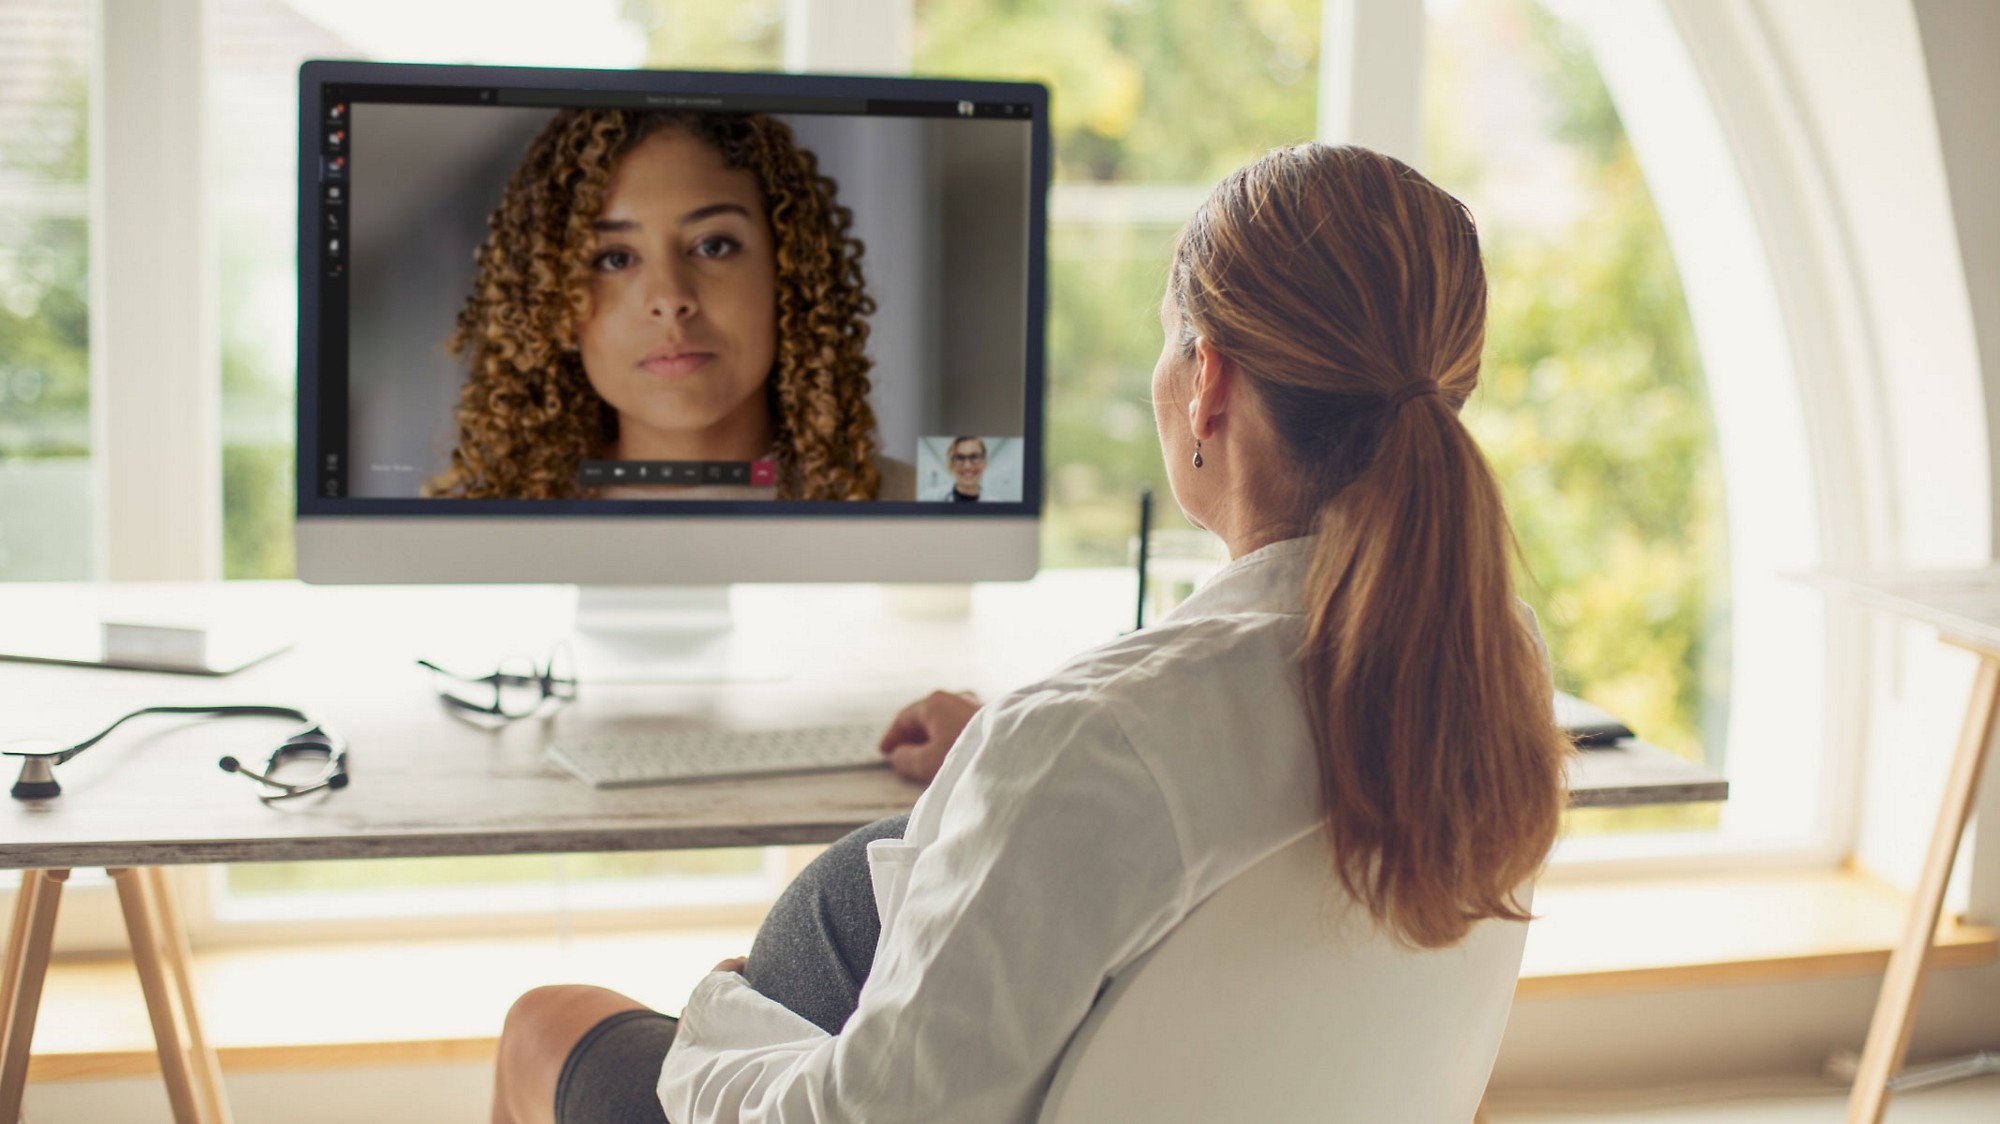 A Teams video call between a patient and a healthcare professional.